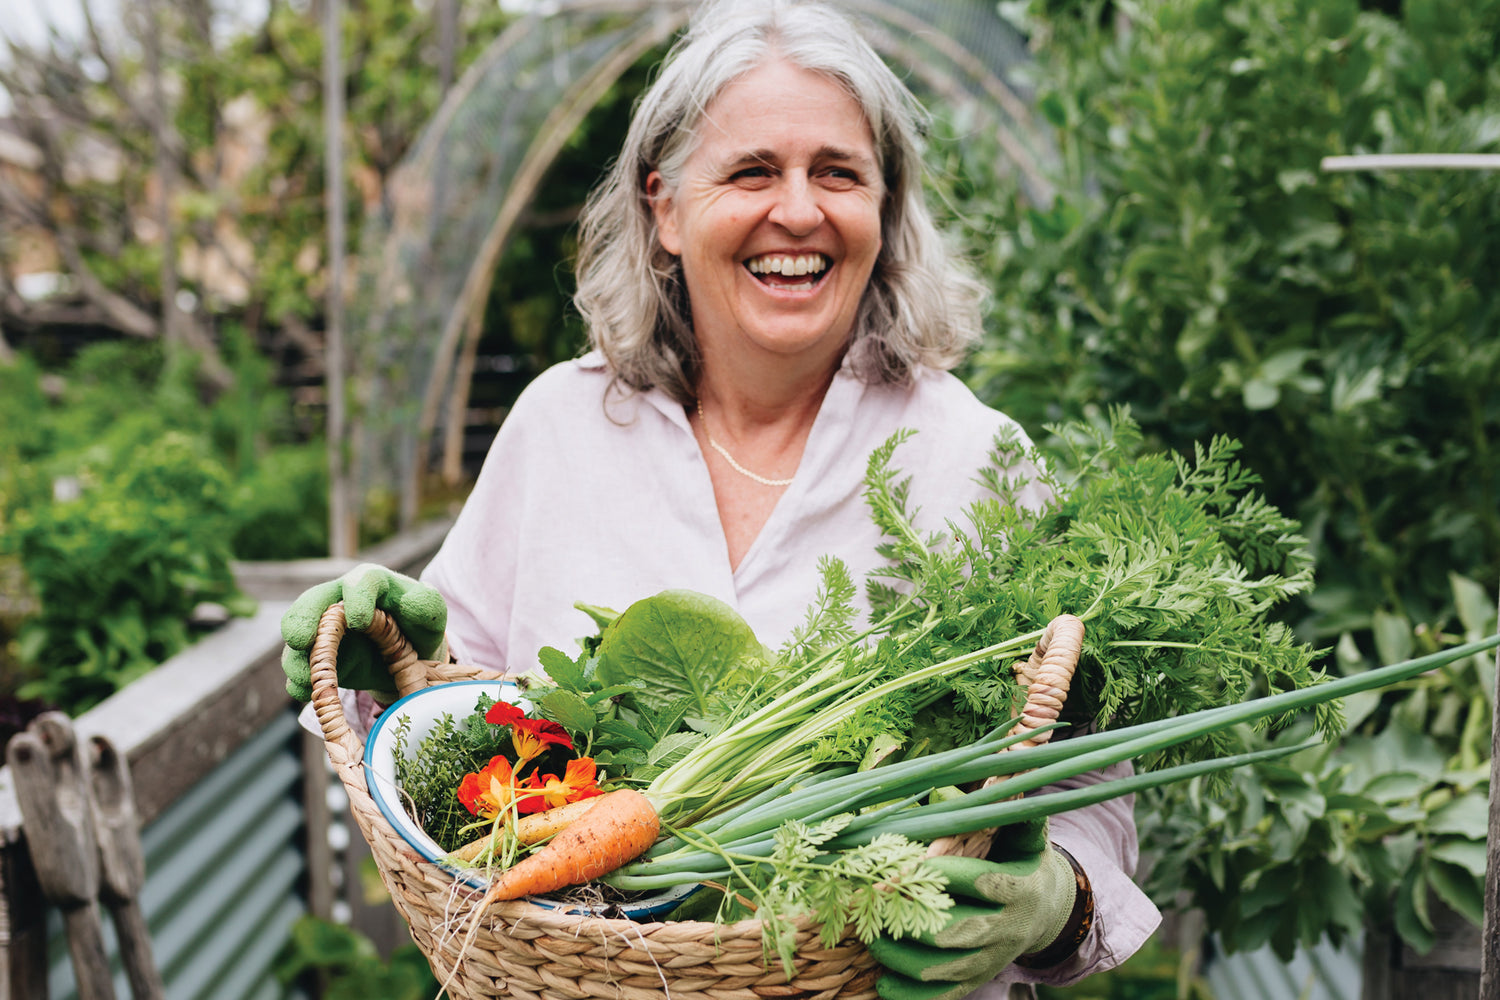 Female in garden carrying basket of vegetables while smiling